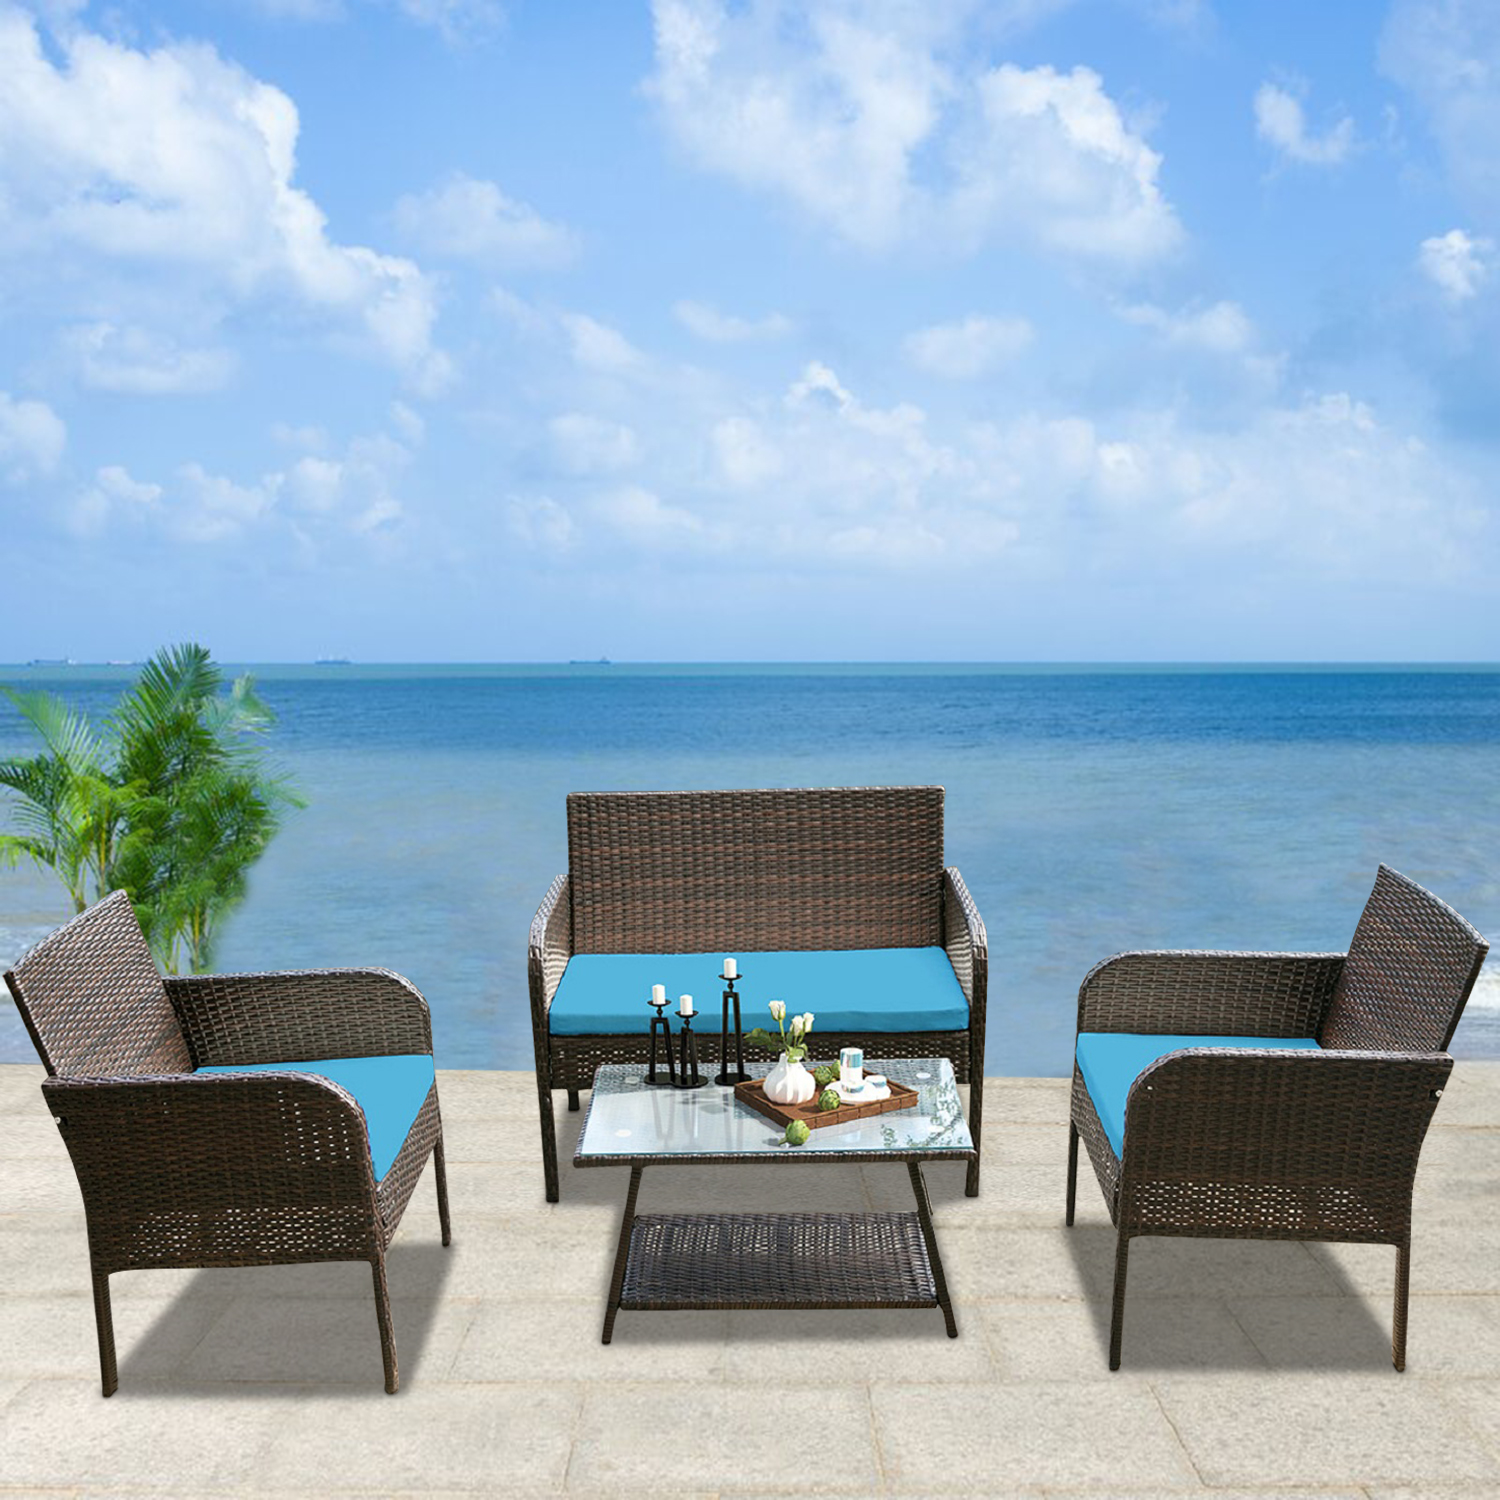 uhomepro 4 Piece Bistro Patio Set, Rattan Wicker Outdoor Patio Furniture with 2pcs Arm Chairs, 1pc Love Seat, Coffee Table, Blue Cushion, Dining Set for Backyard Poolside Garden - image 2 of 7